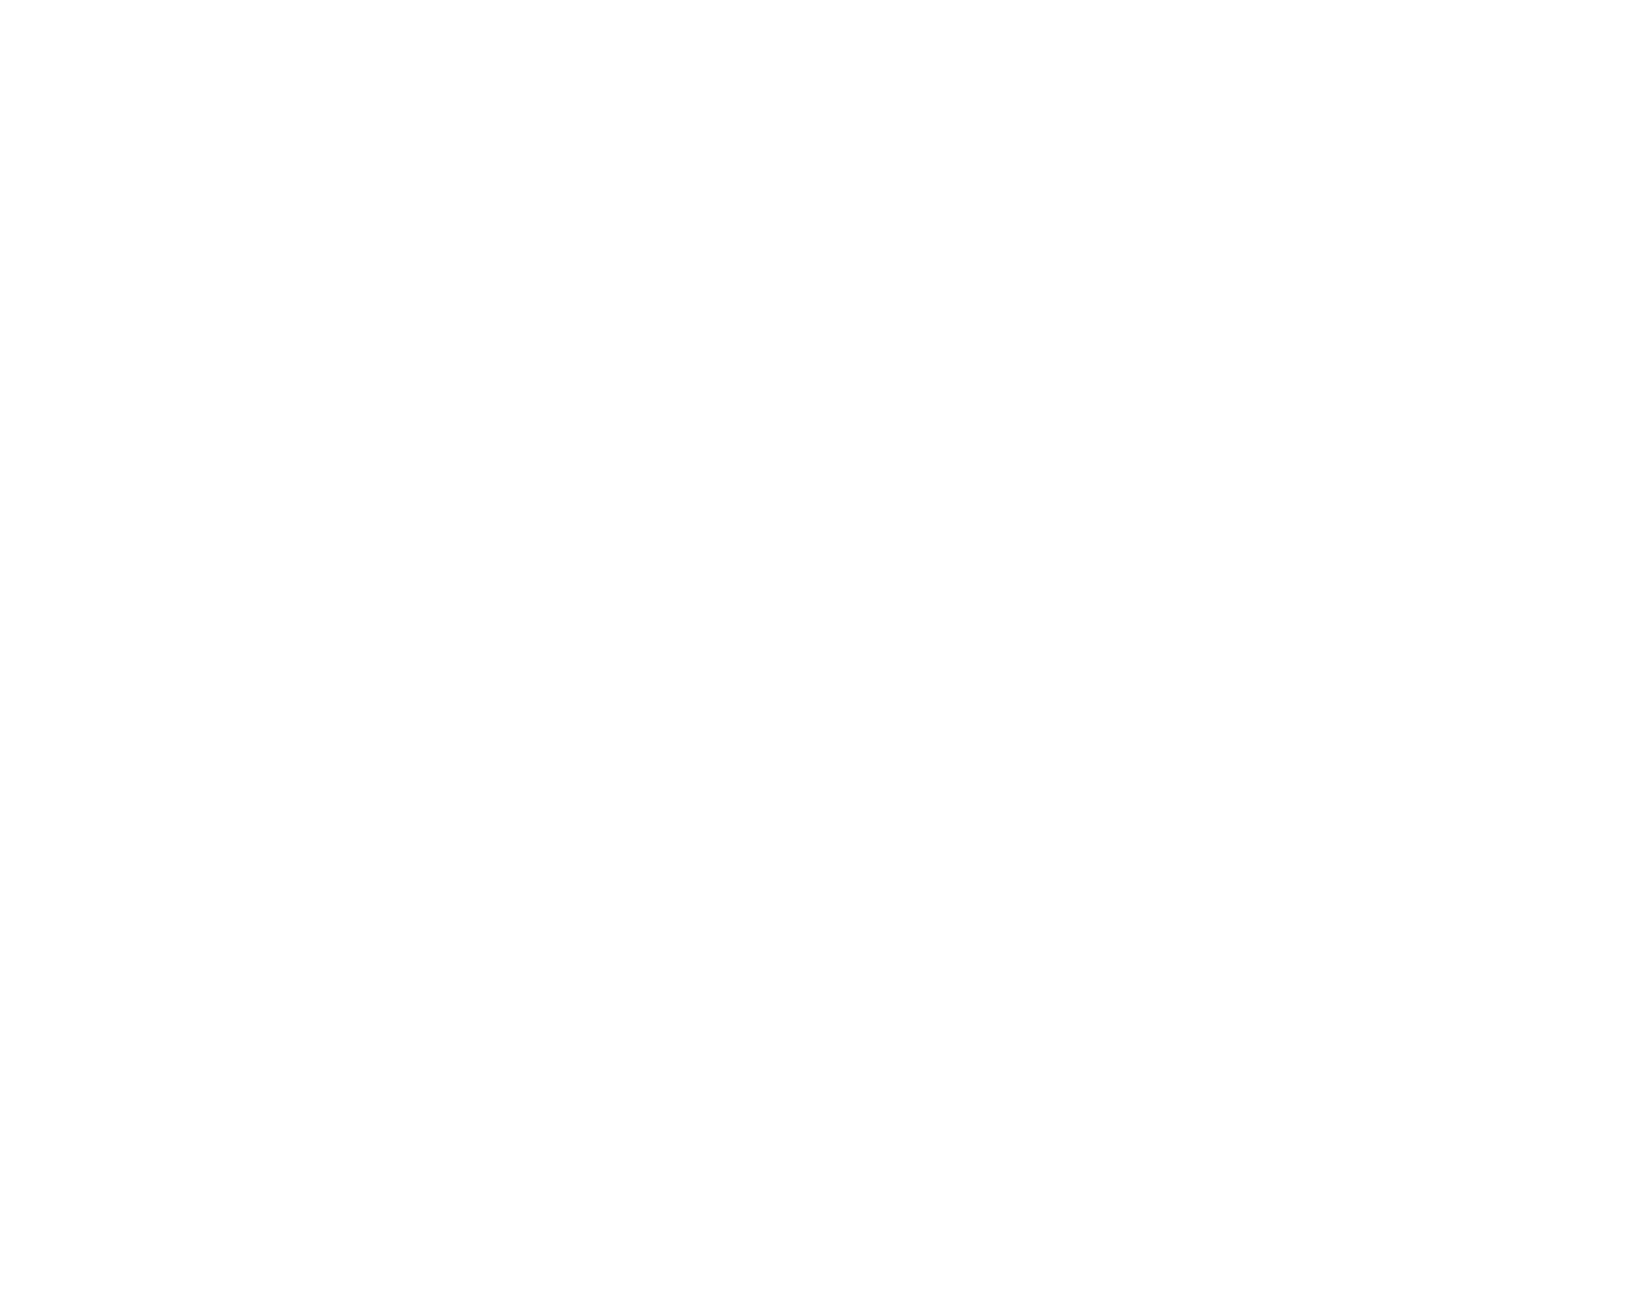 How to Get Away with Murder logo